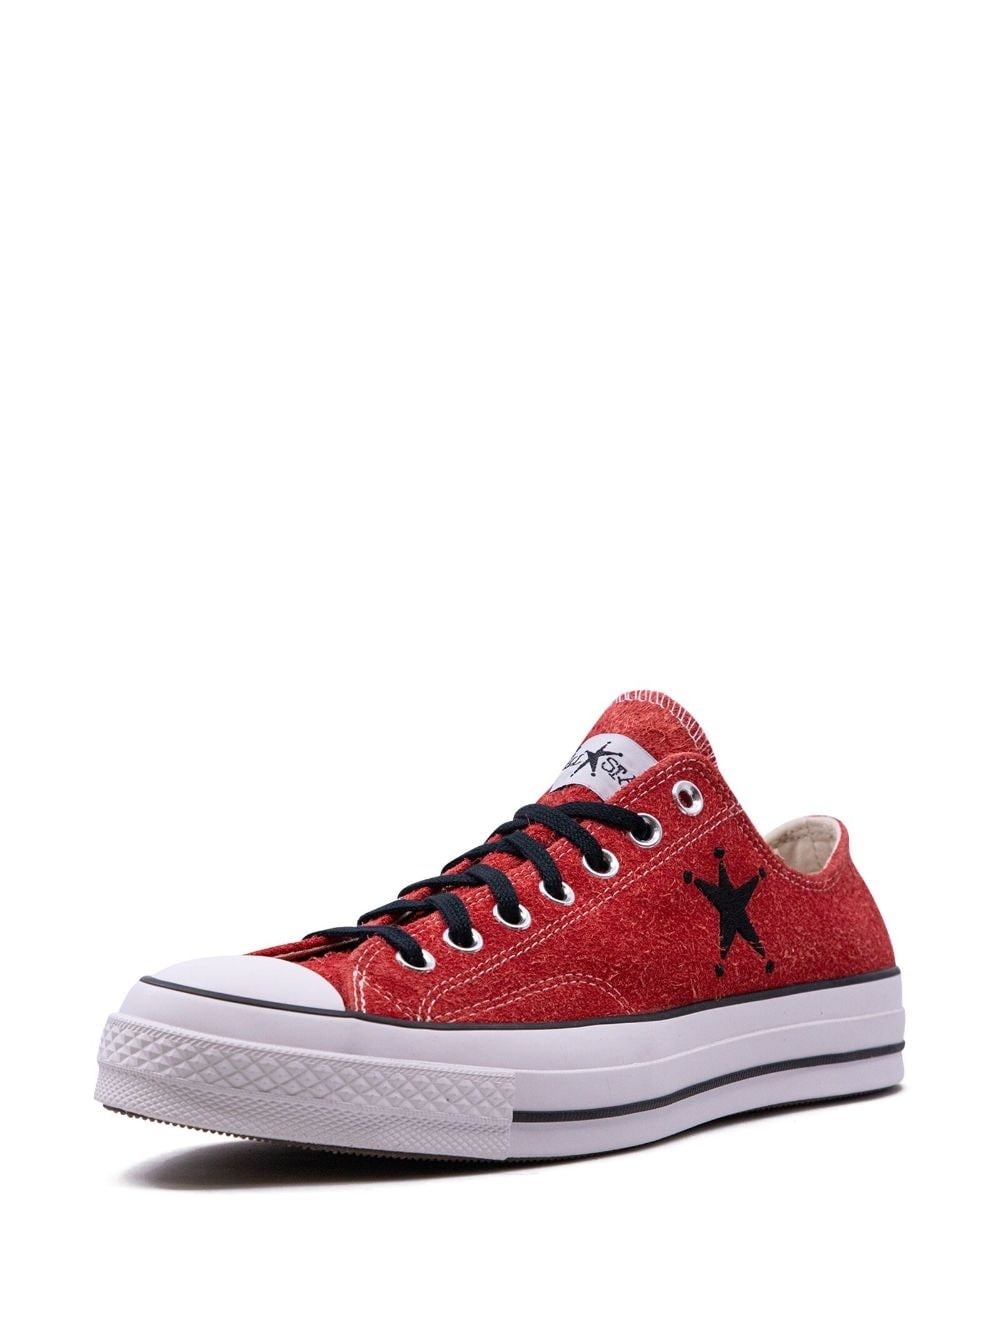 x Stussy Chuck 70 "Poppy Red" sneakers - 4